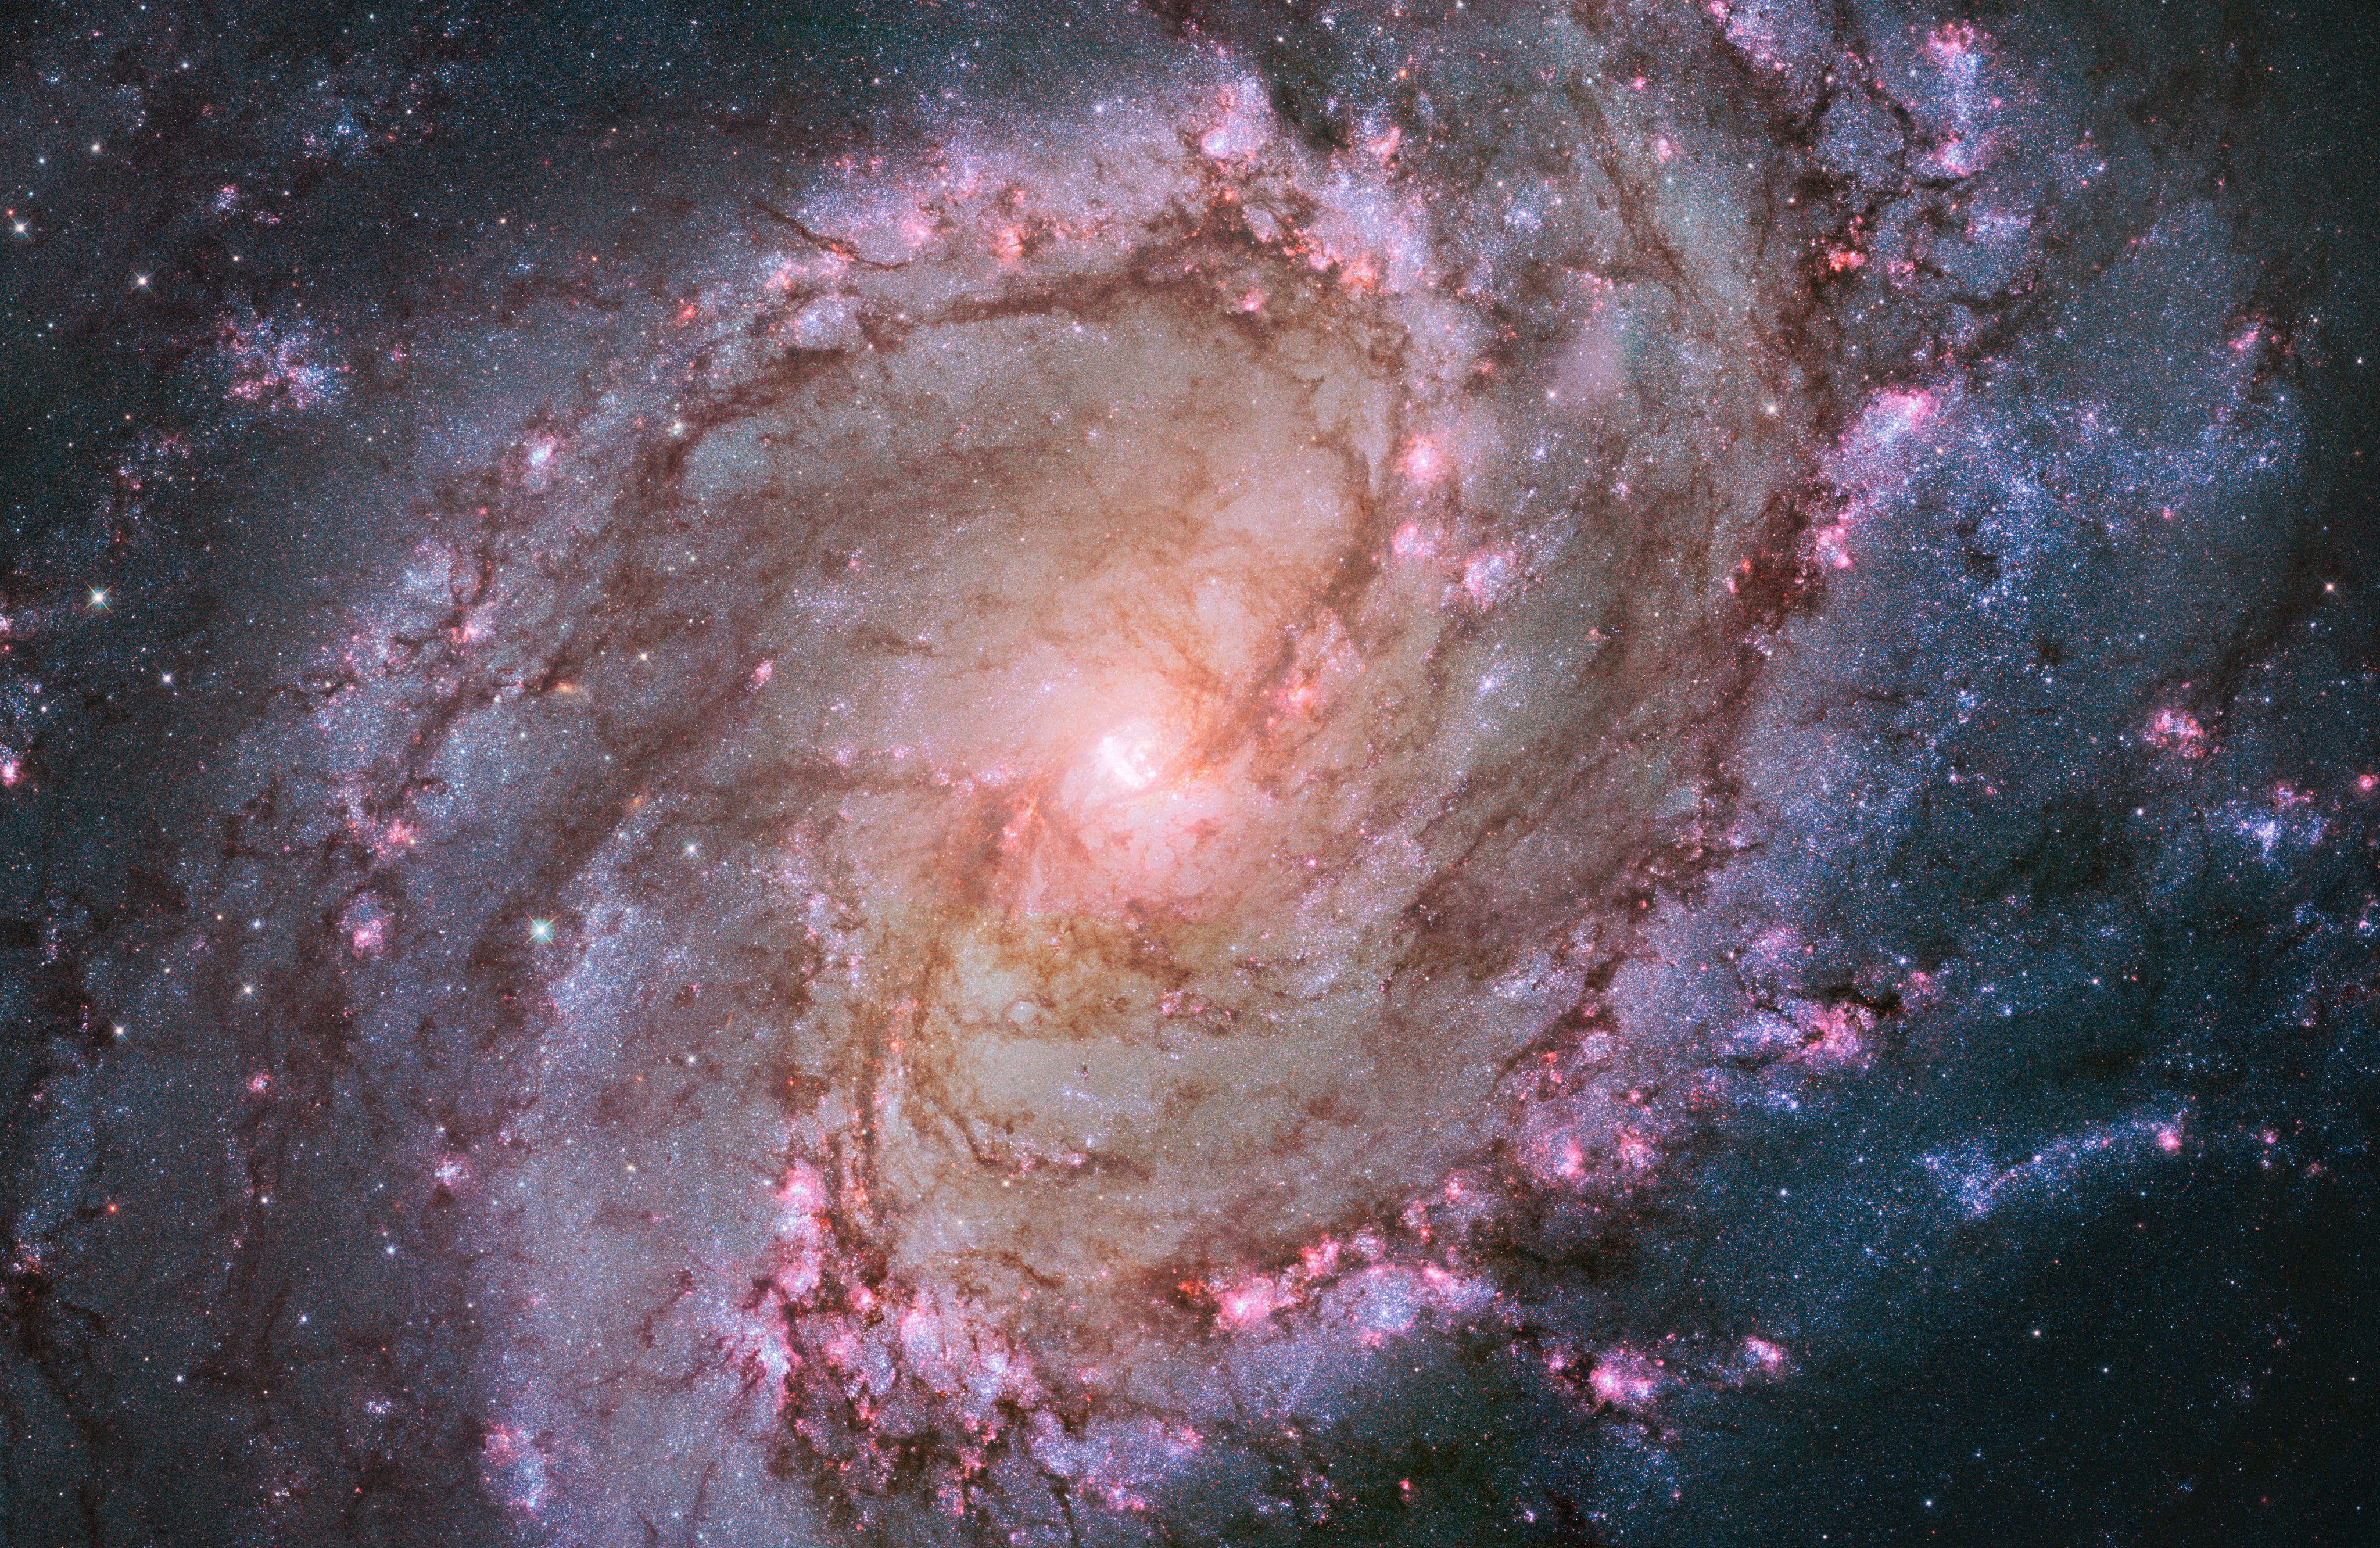 Galaxy with soft purple arms and blue stars spiraling around its bright white center.